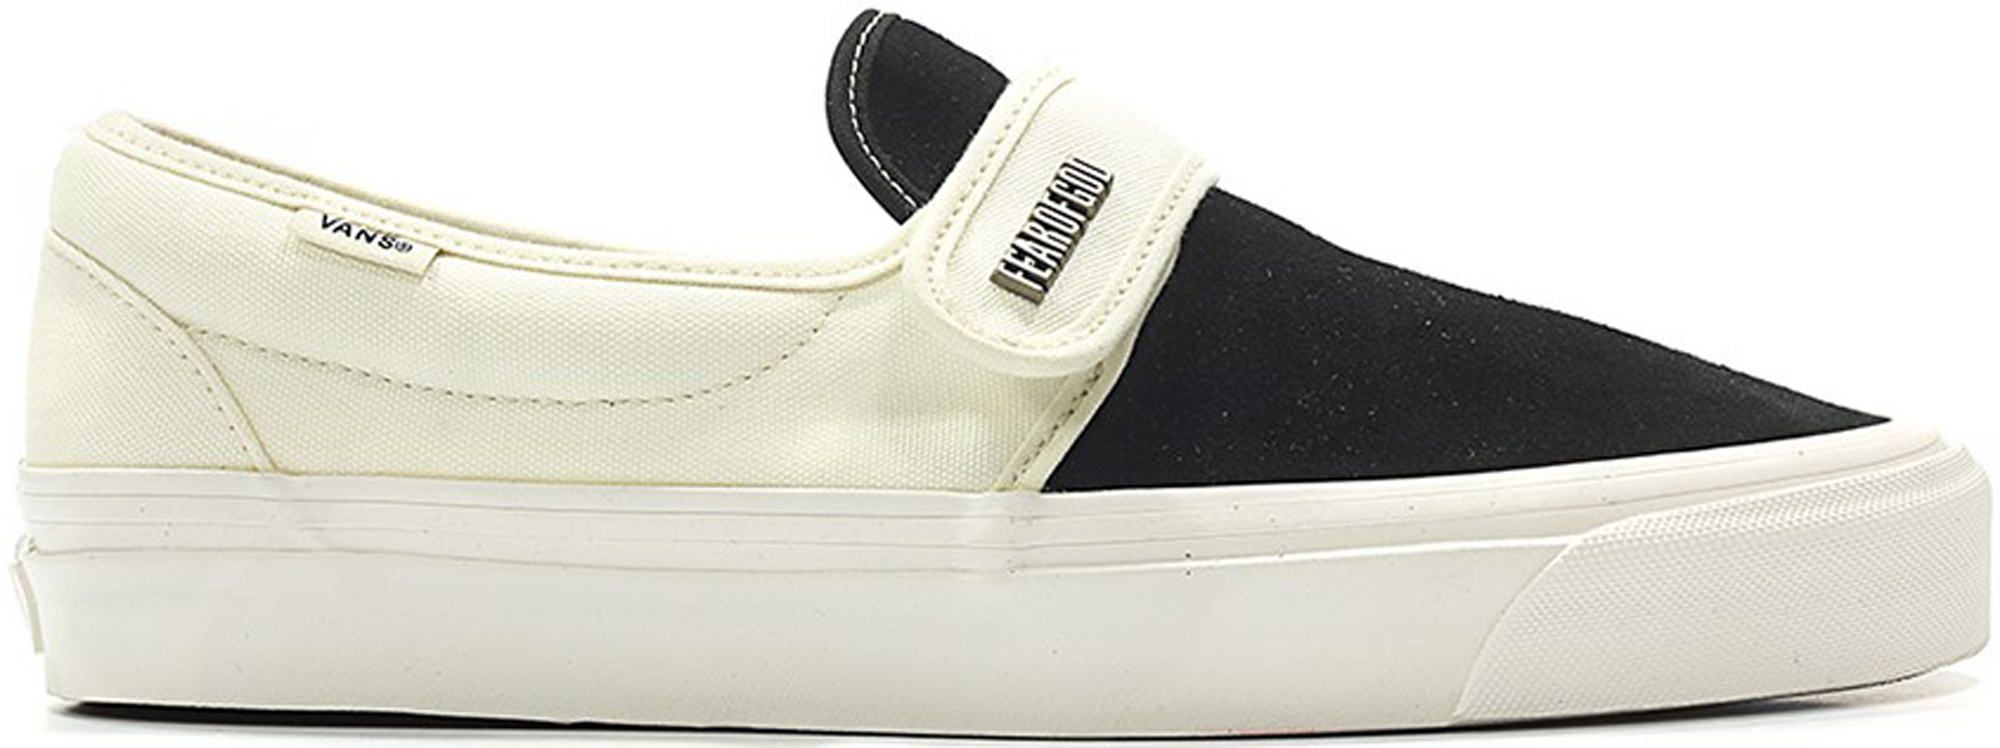 where to buy vans fear of god